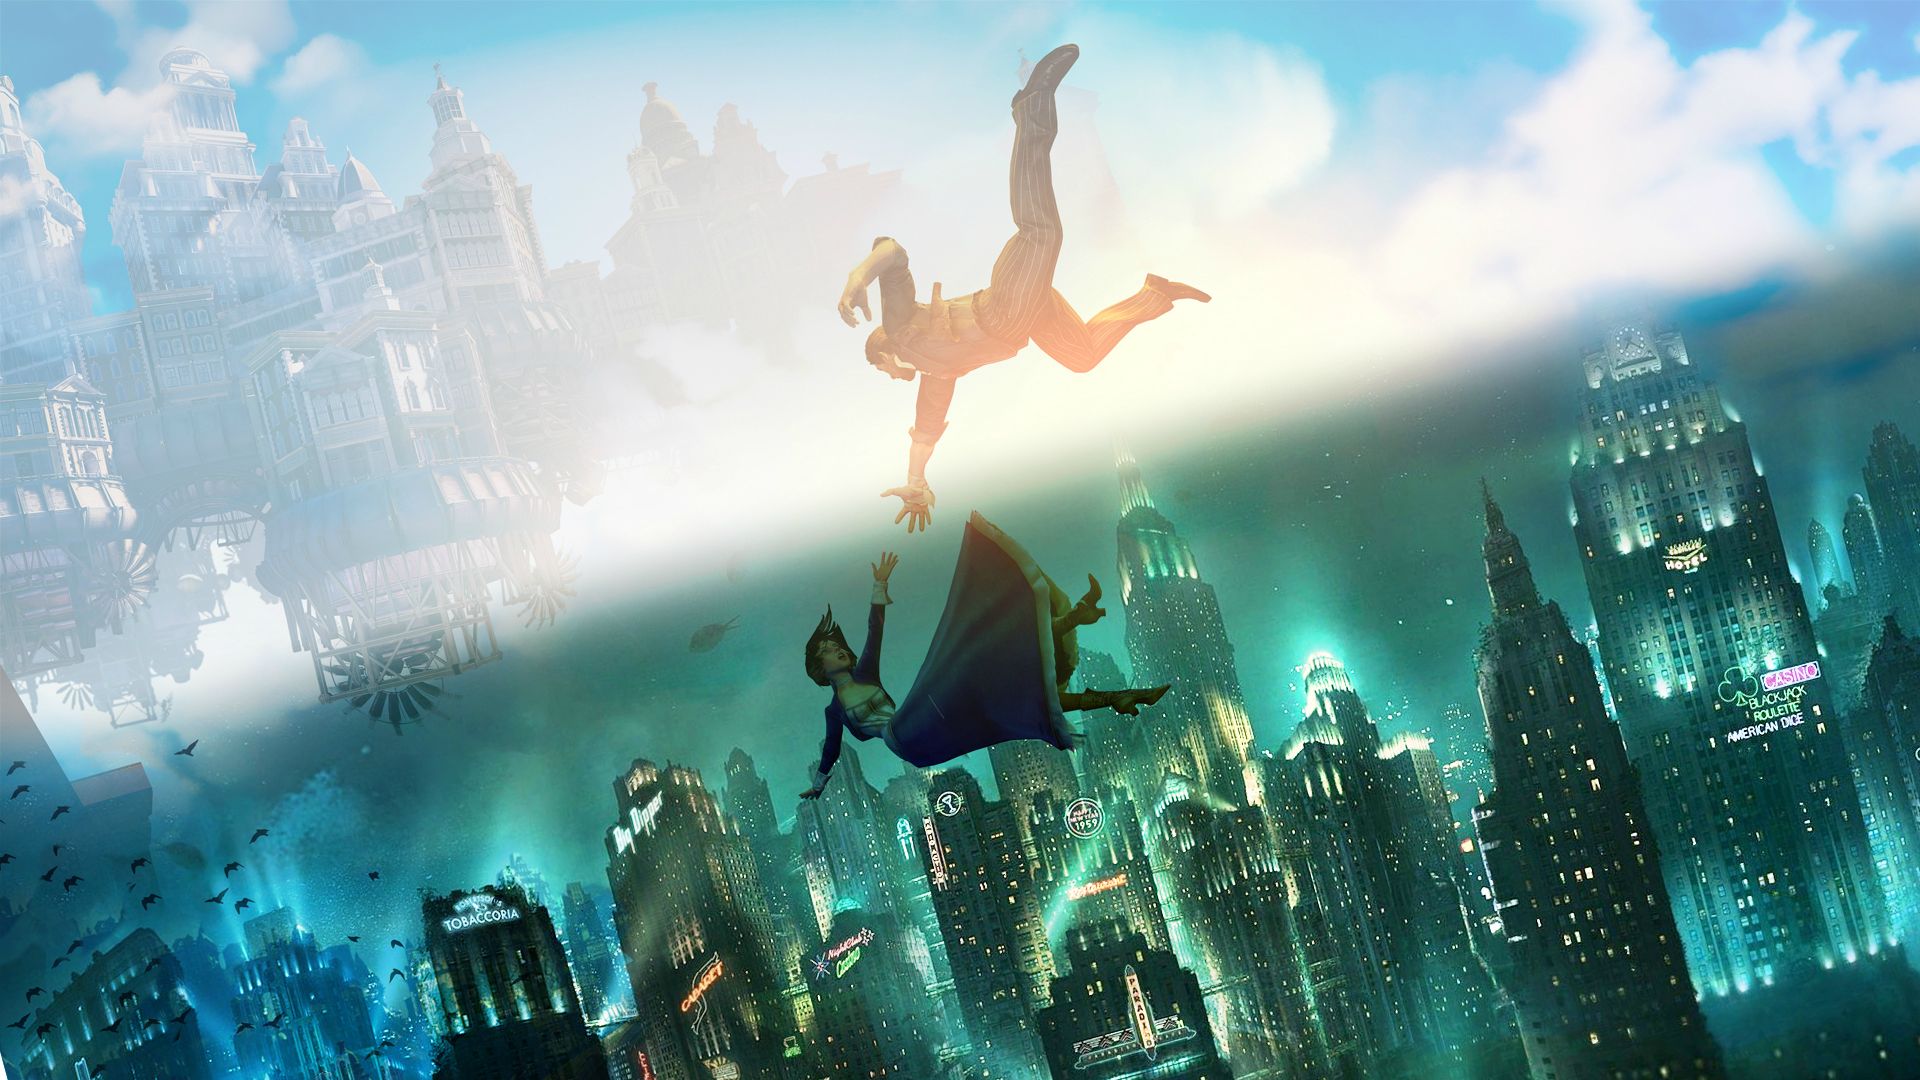 Bioshock Infinite Hd Wallpapers Background Images Wallpaper Abyss